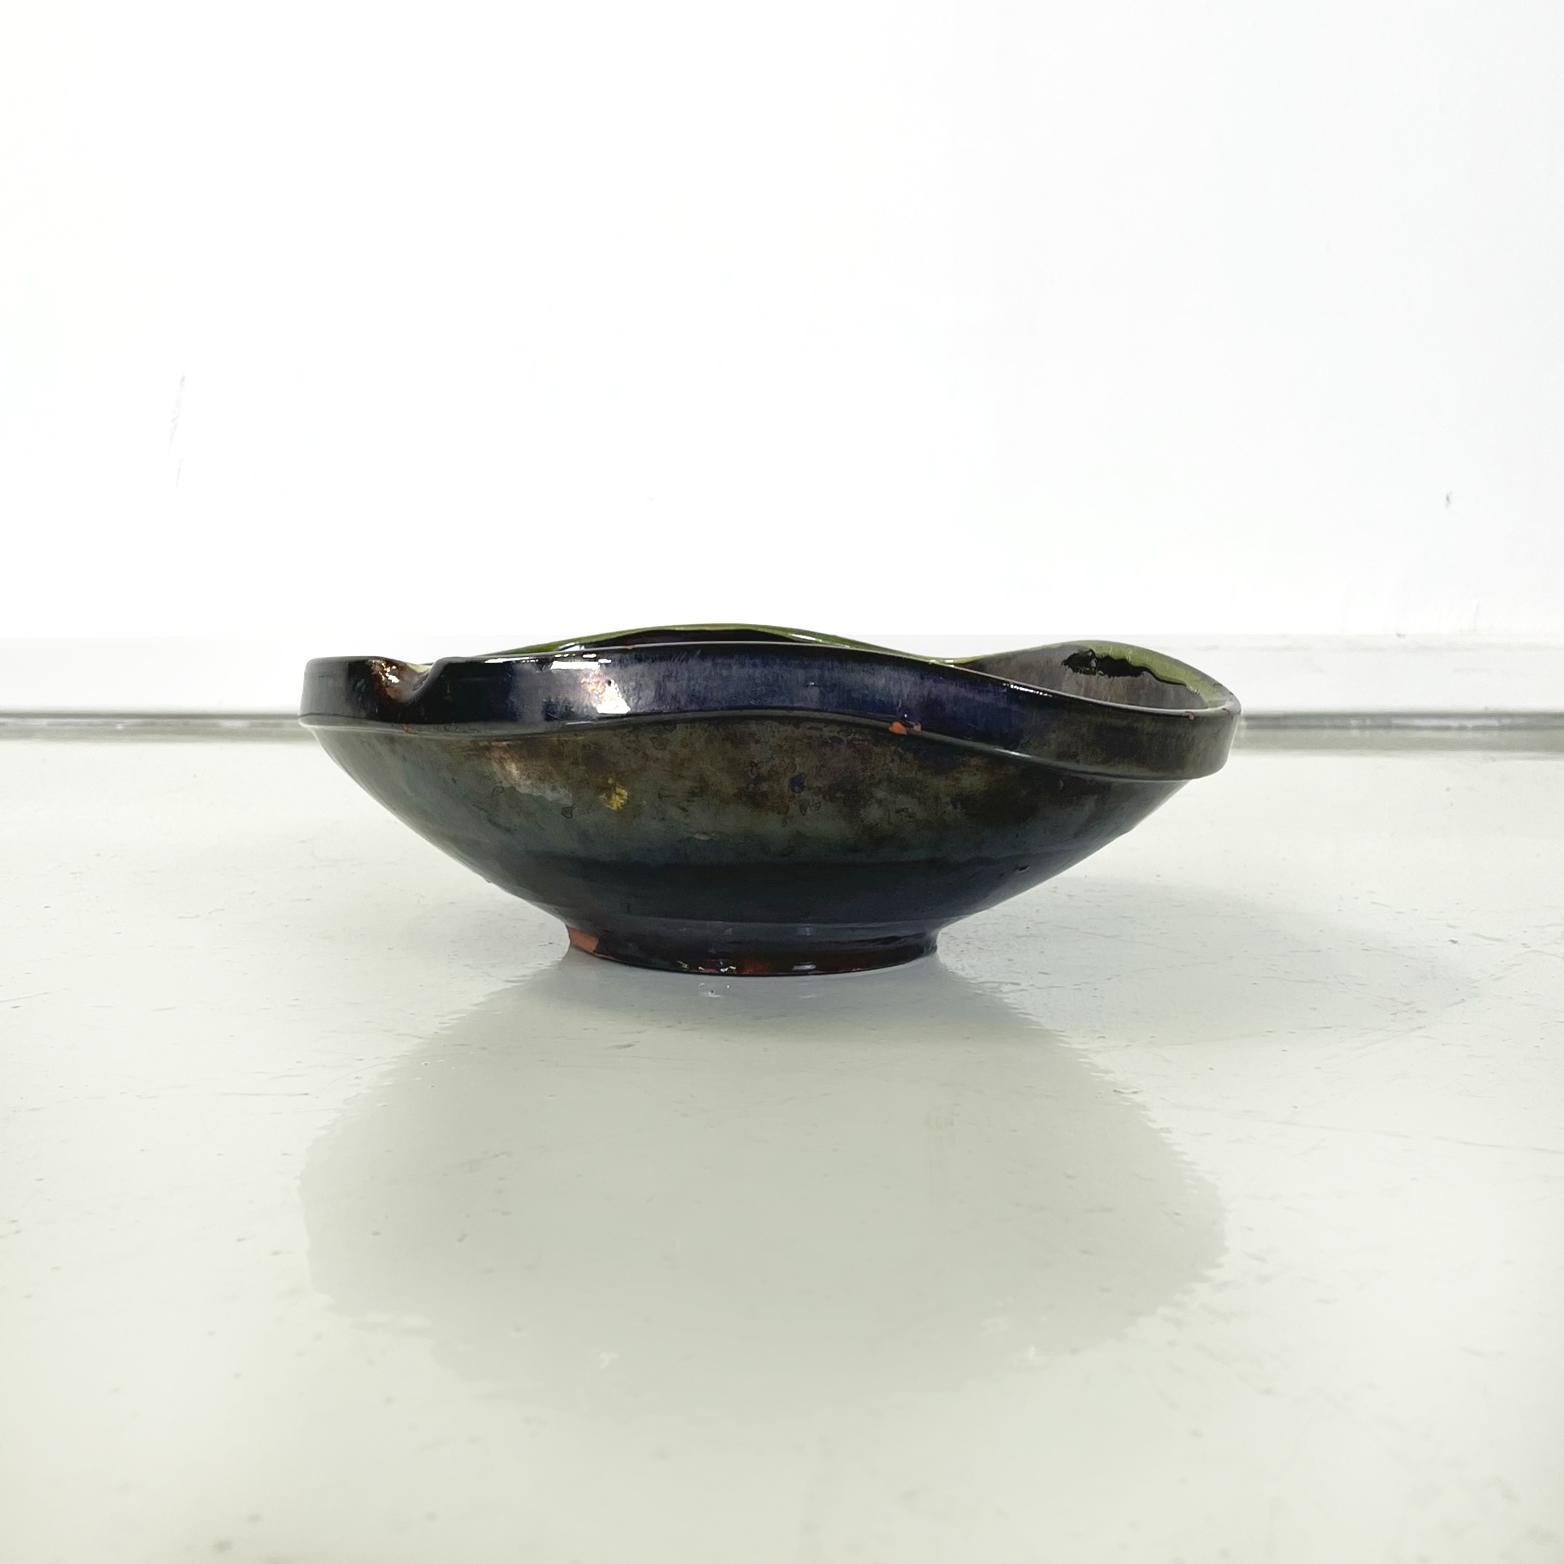 Spanish Mid-Century Modern Bowl in green, black and blue ceramic by Ignacio Buxo, 1950s
Round base bowl in green, black and blue ceramic. The upper profile is irregular. This is perfect as a centerpiece on a table or object holder.
Created by